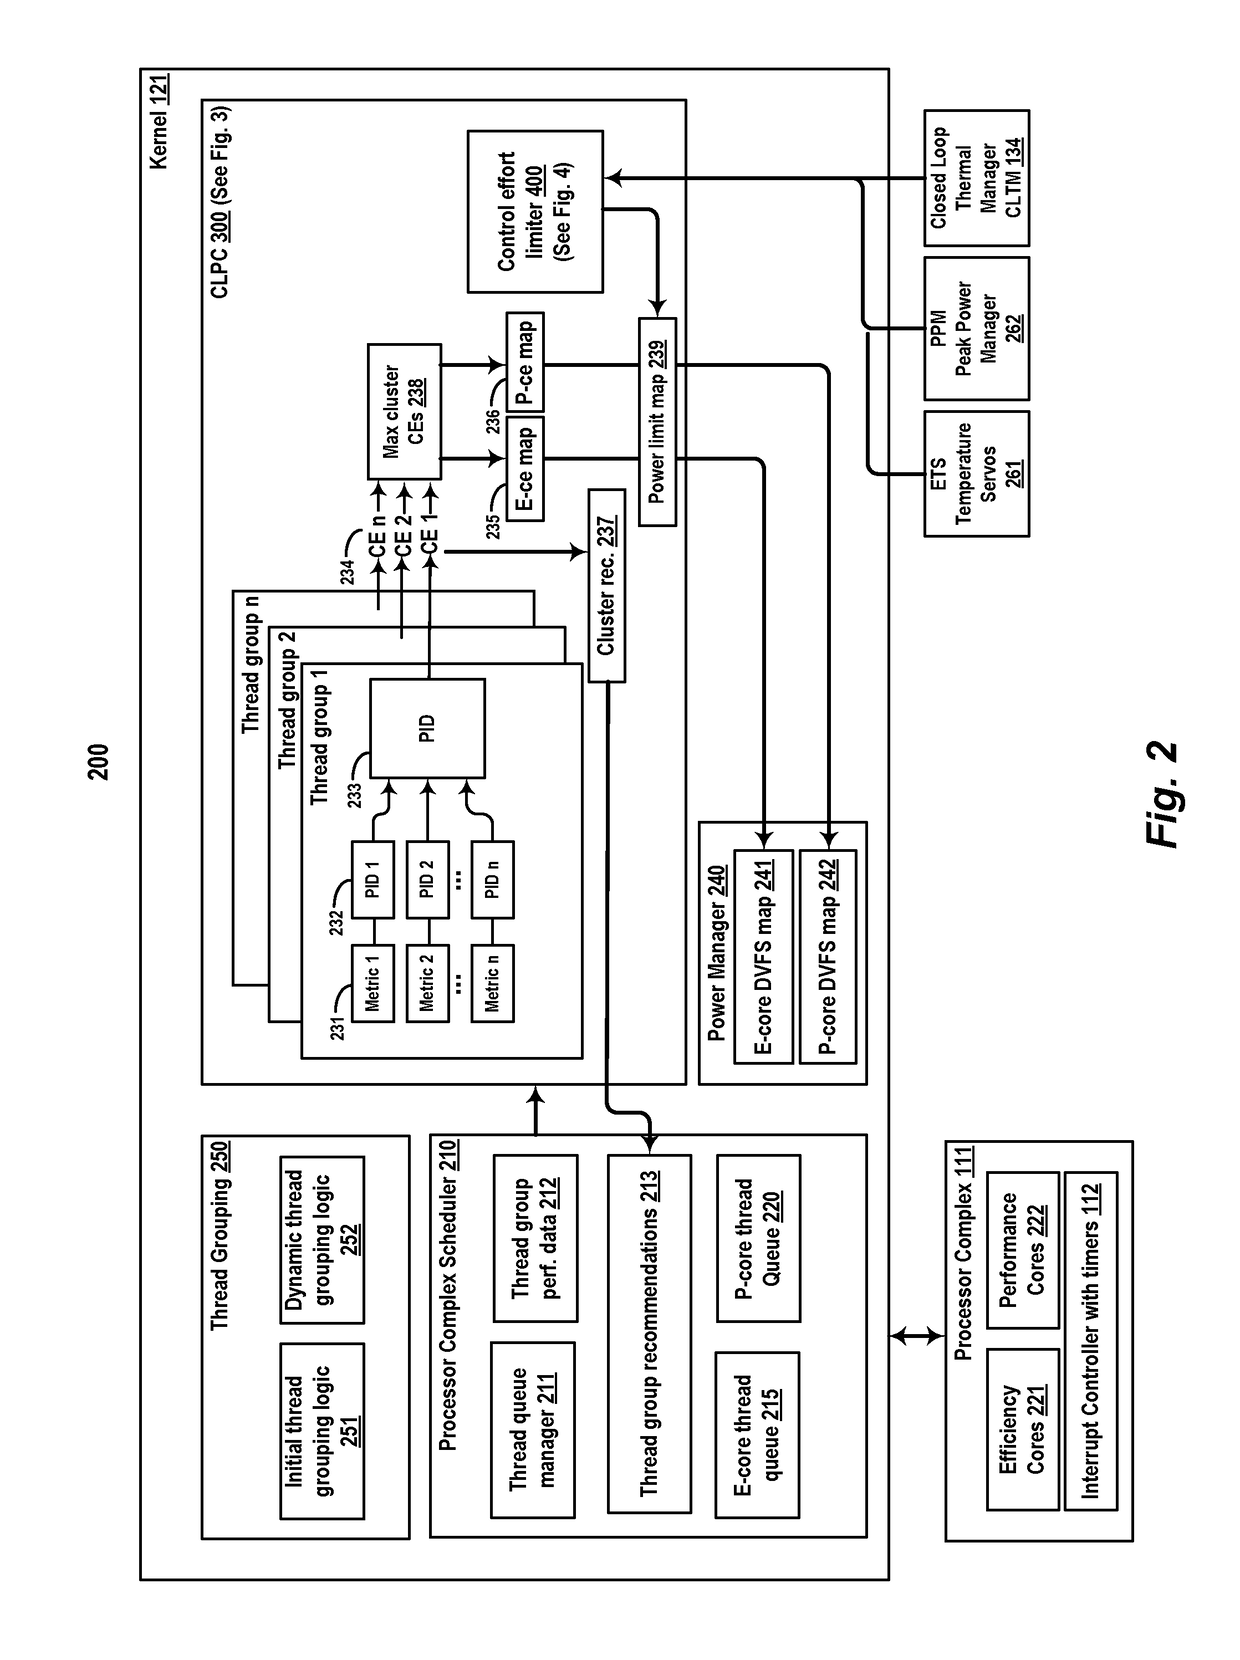 Closed loop performance controller work interval instance propagation